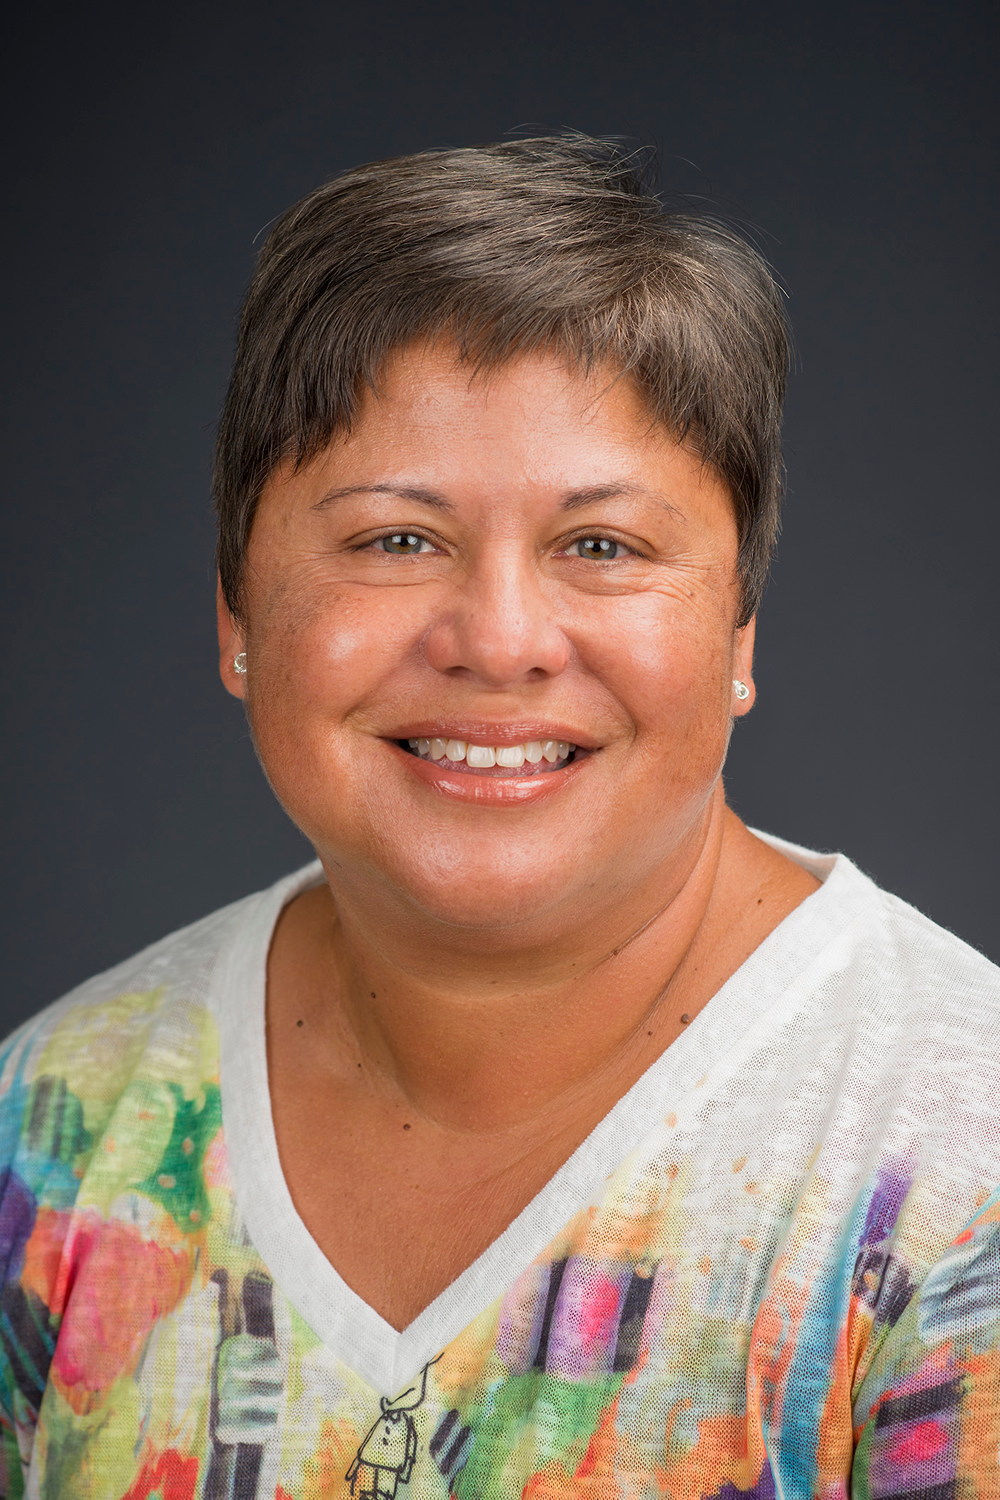 Photo of Dr. Adrienne Viramontes, chair of UW-Parkside’s Communication Department, which earned the Board of Regents 2022 Teaching Excellence Award for a program